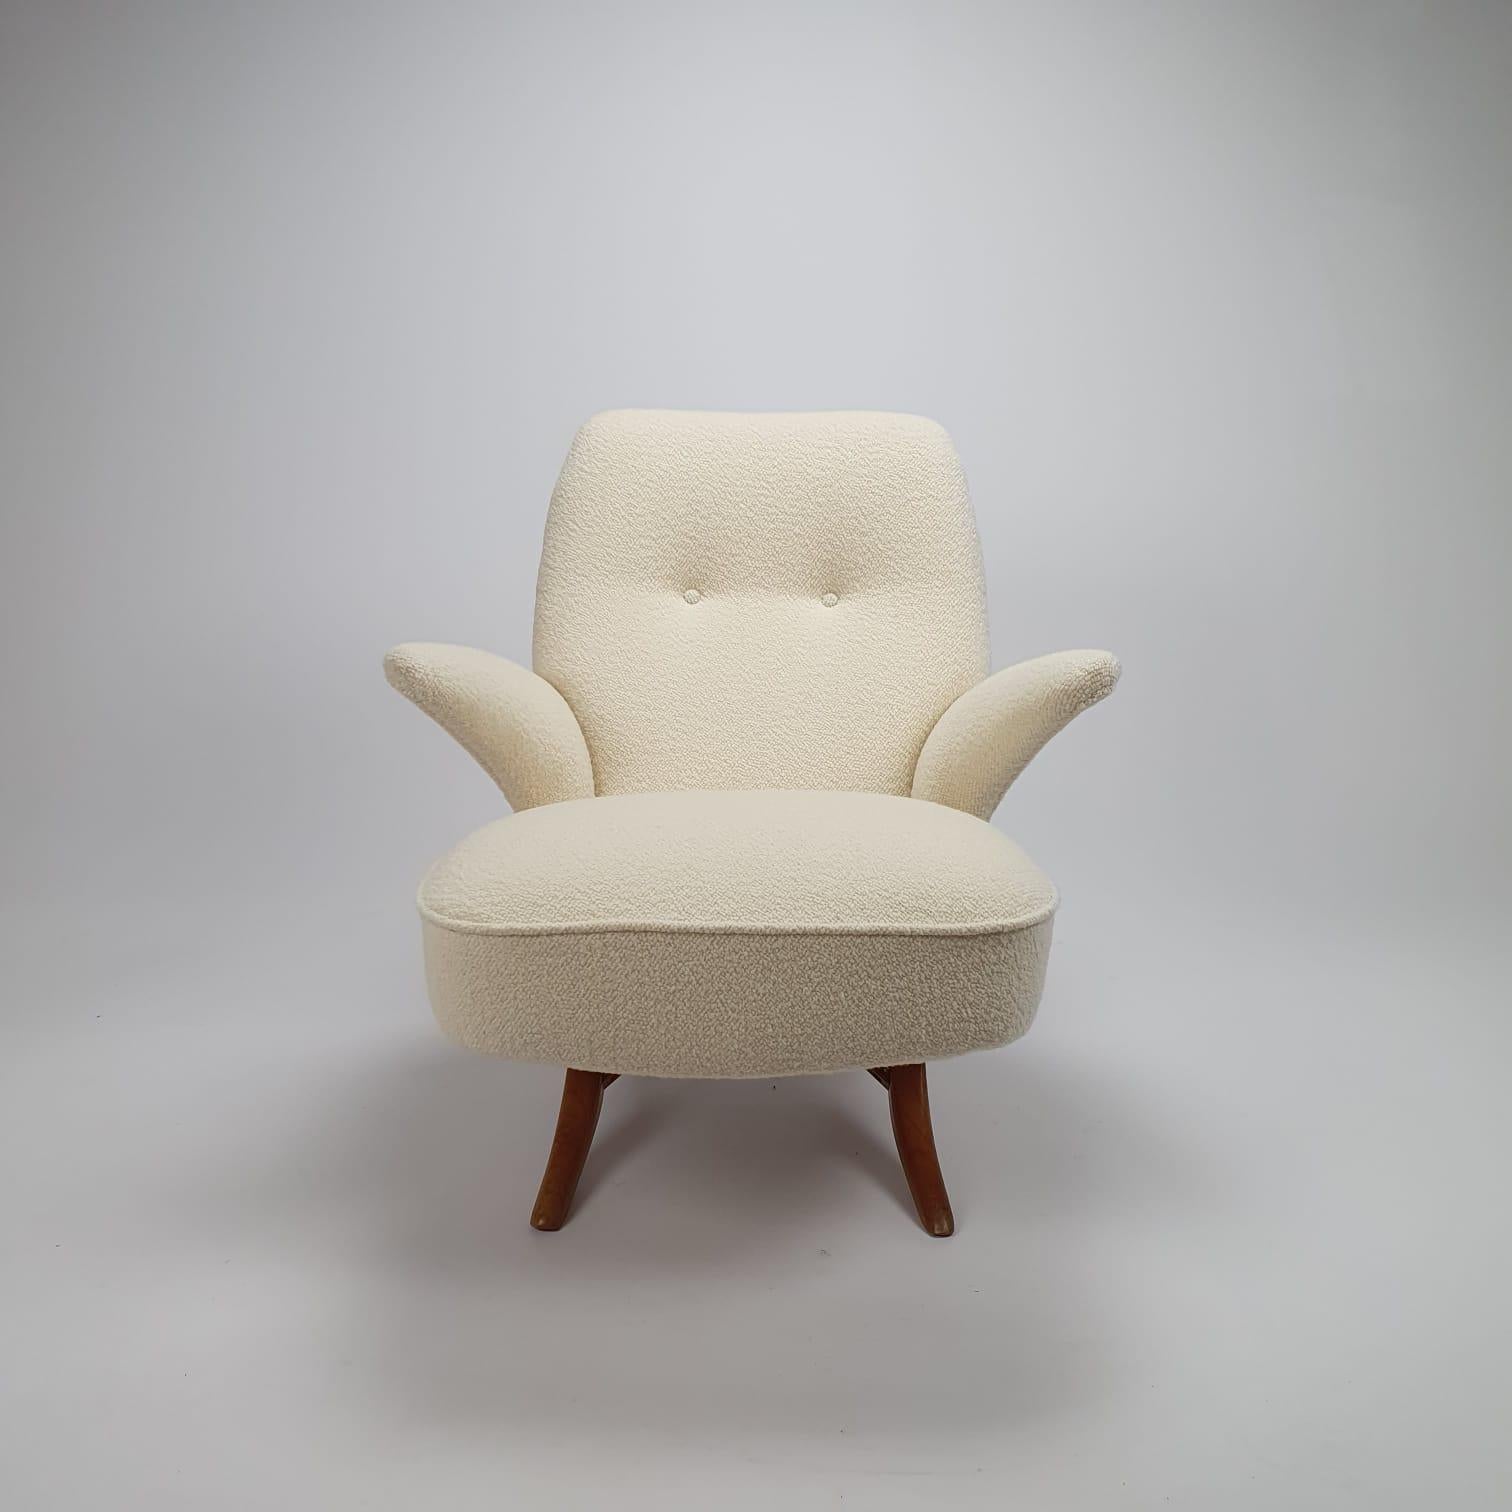 Stunning Mid-Century Modern penguin chair, designed by Theo Ruth for Artifort.
Iconic Dutch design from the 50s.
The back and the seater are 2 separate pieces that easily fits together and makes it a unique chair.
The chair is restored with new